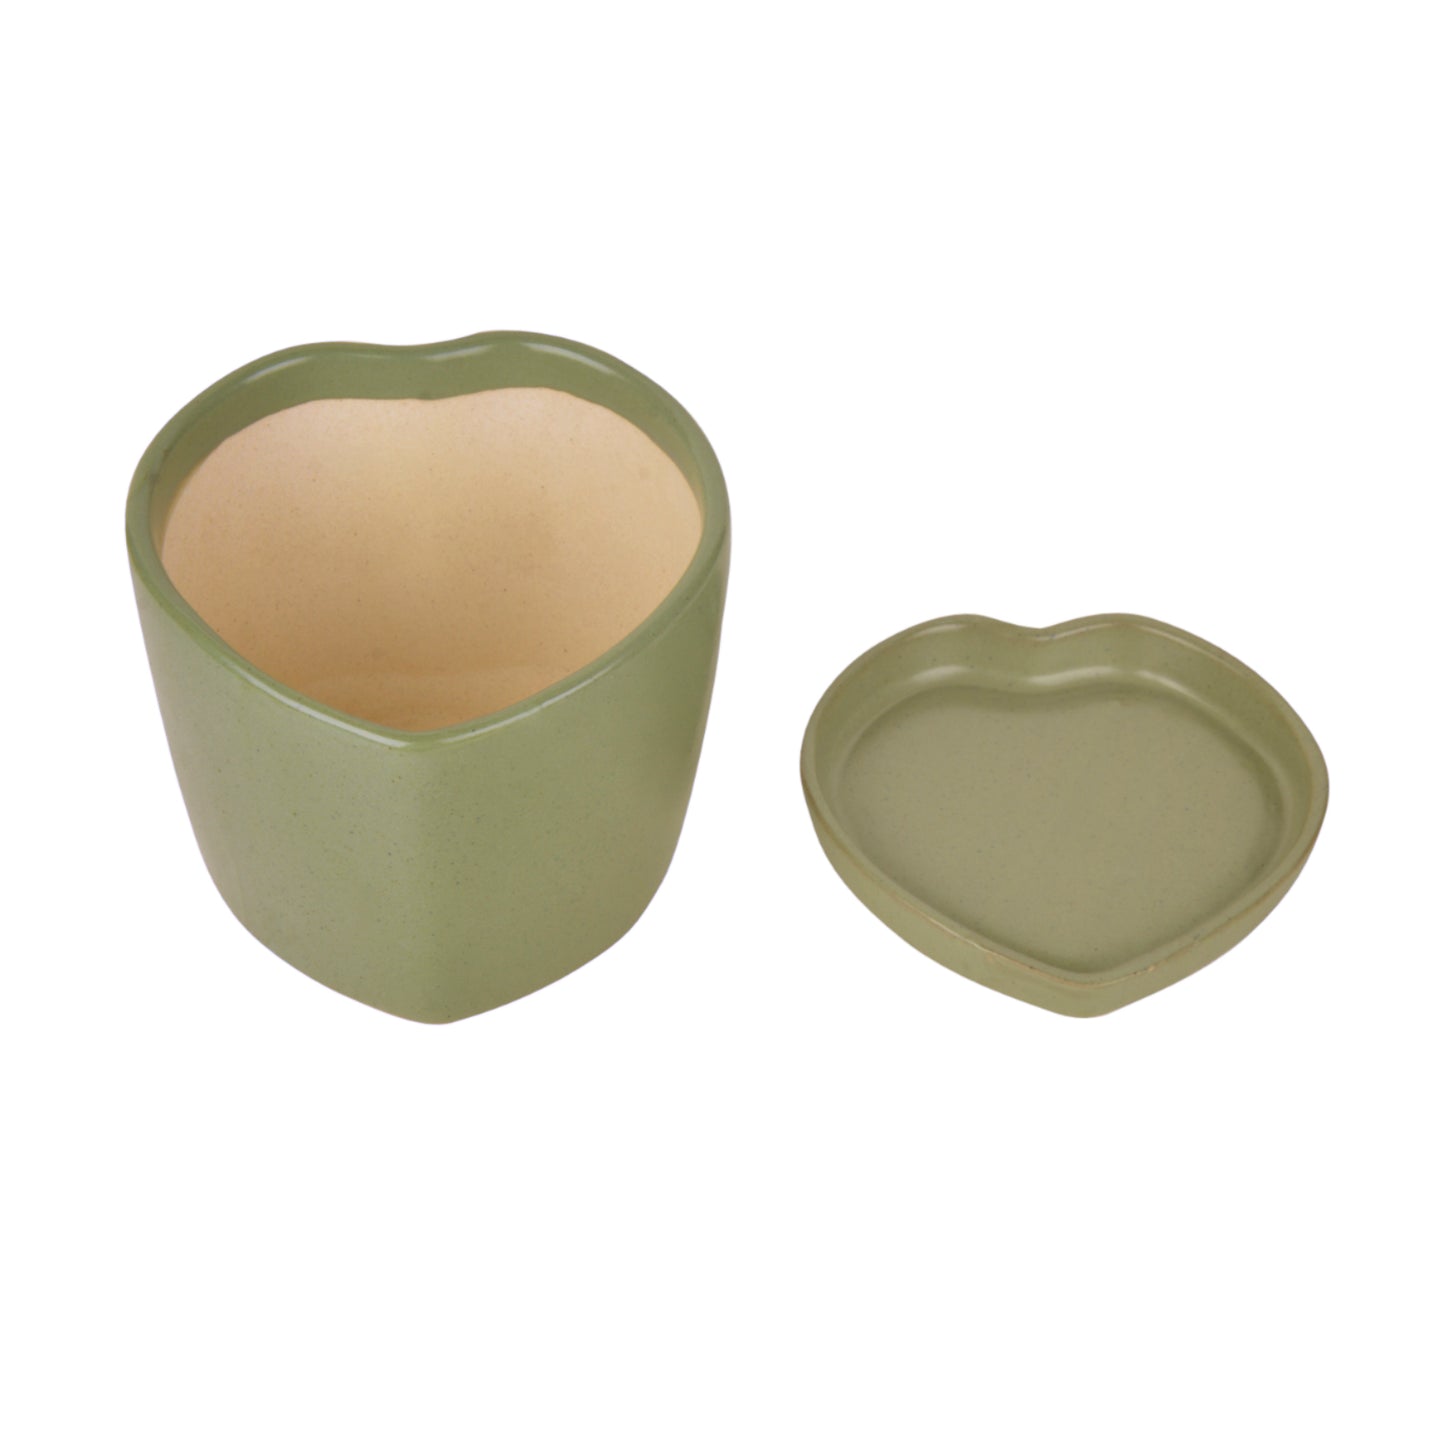 Handpainted Heart Shaped Ceramic Planter Pot with Tray (Sage Green, Diameter - 11 cm, Height - 10 cm)